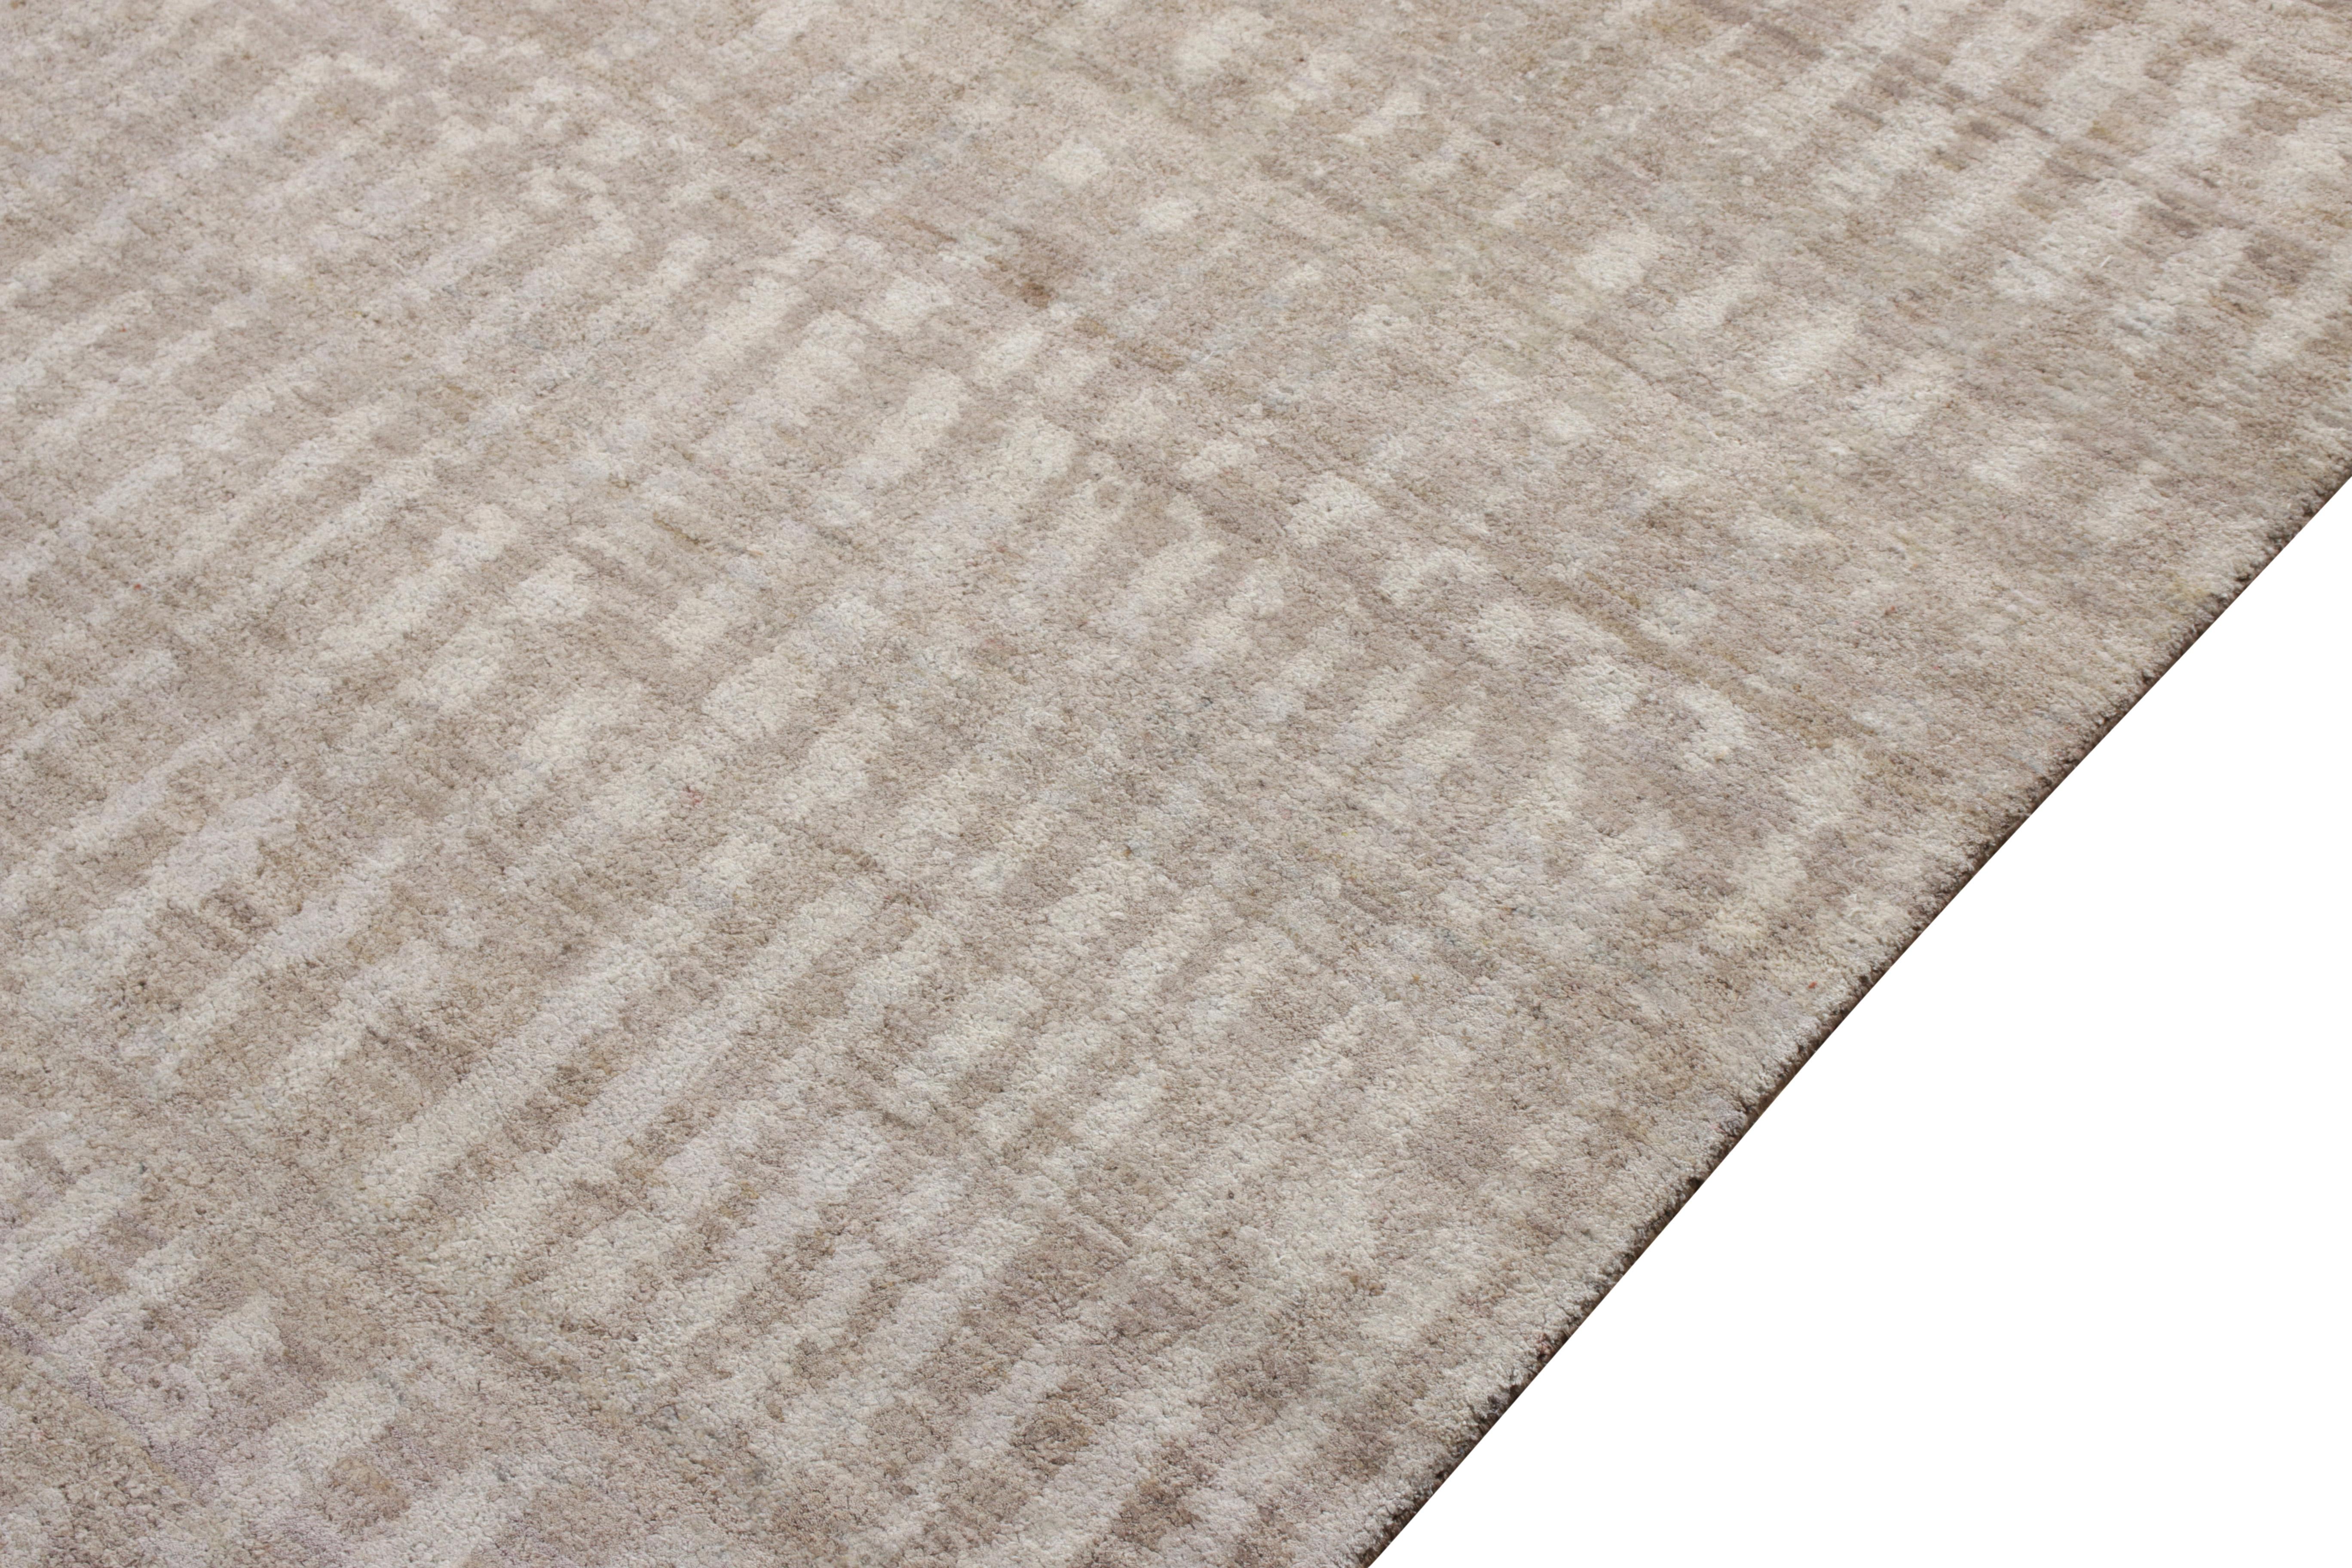 Hand-Knotted Rug & Kilim’s Modern Rug in All over Beige-Brown, White Geometric Pattern For Sale